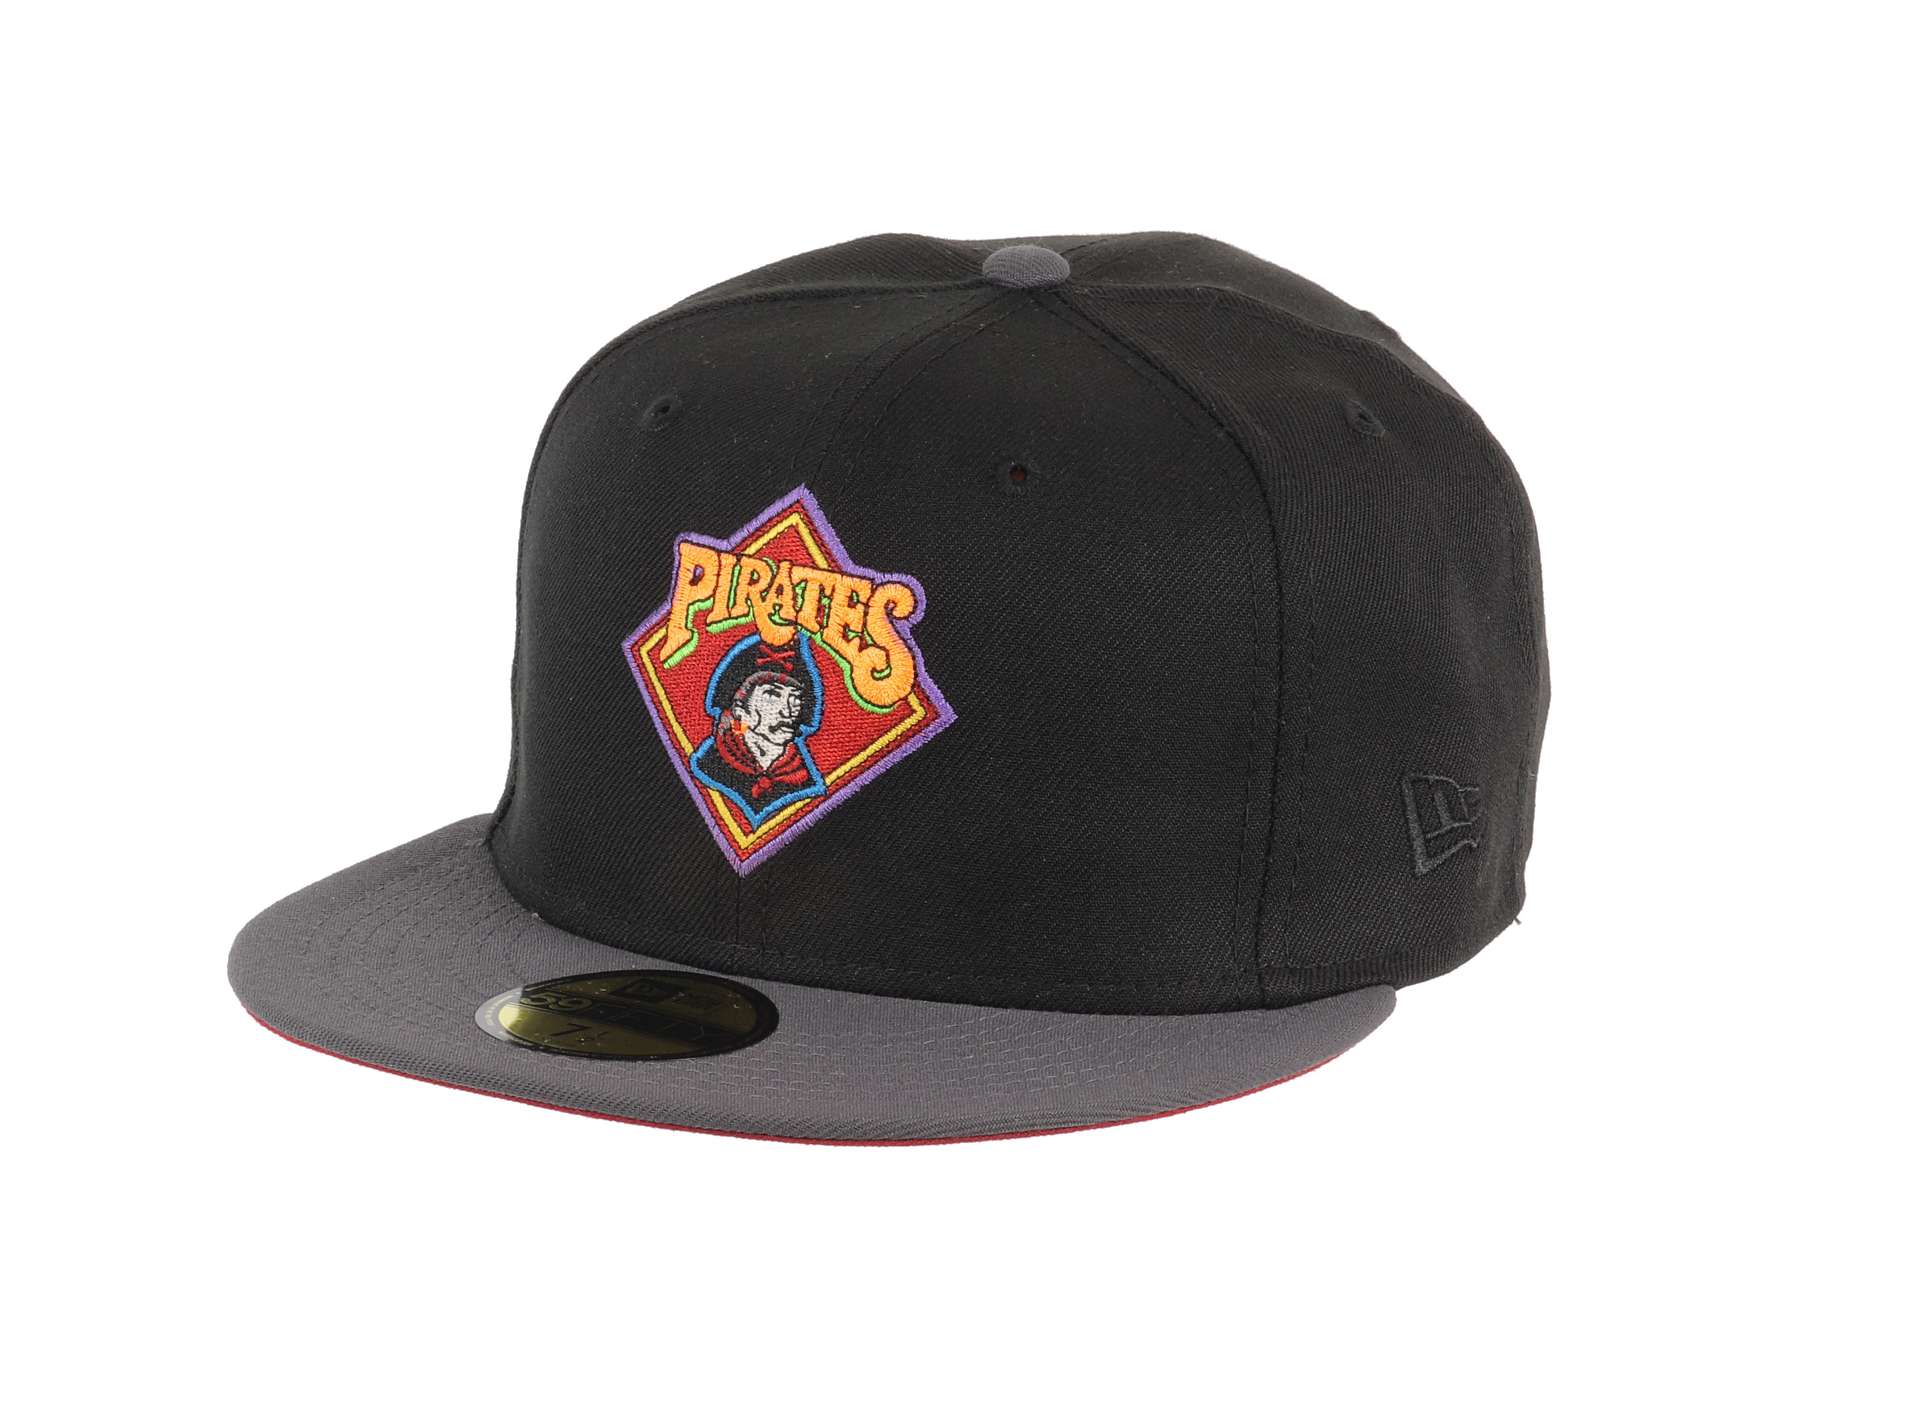 Pittsburgh Pirates MLB Cooperstown Three Rivers Stadium Sidepatch Black 59Fifty Basecap New Era